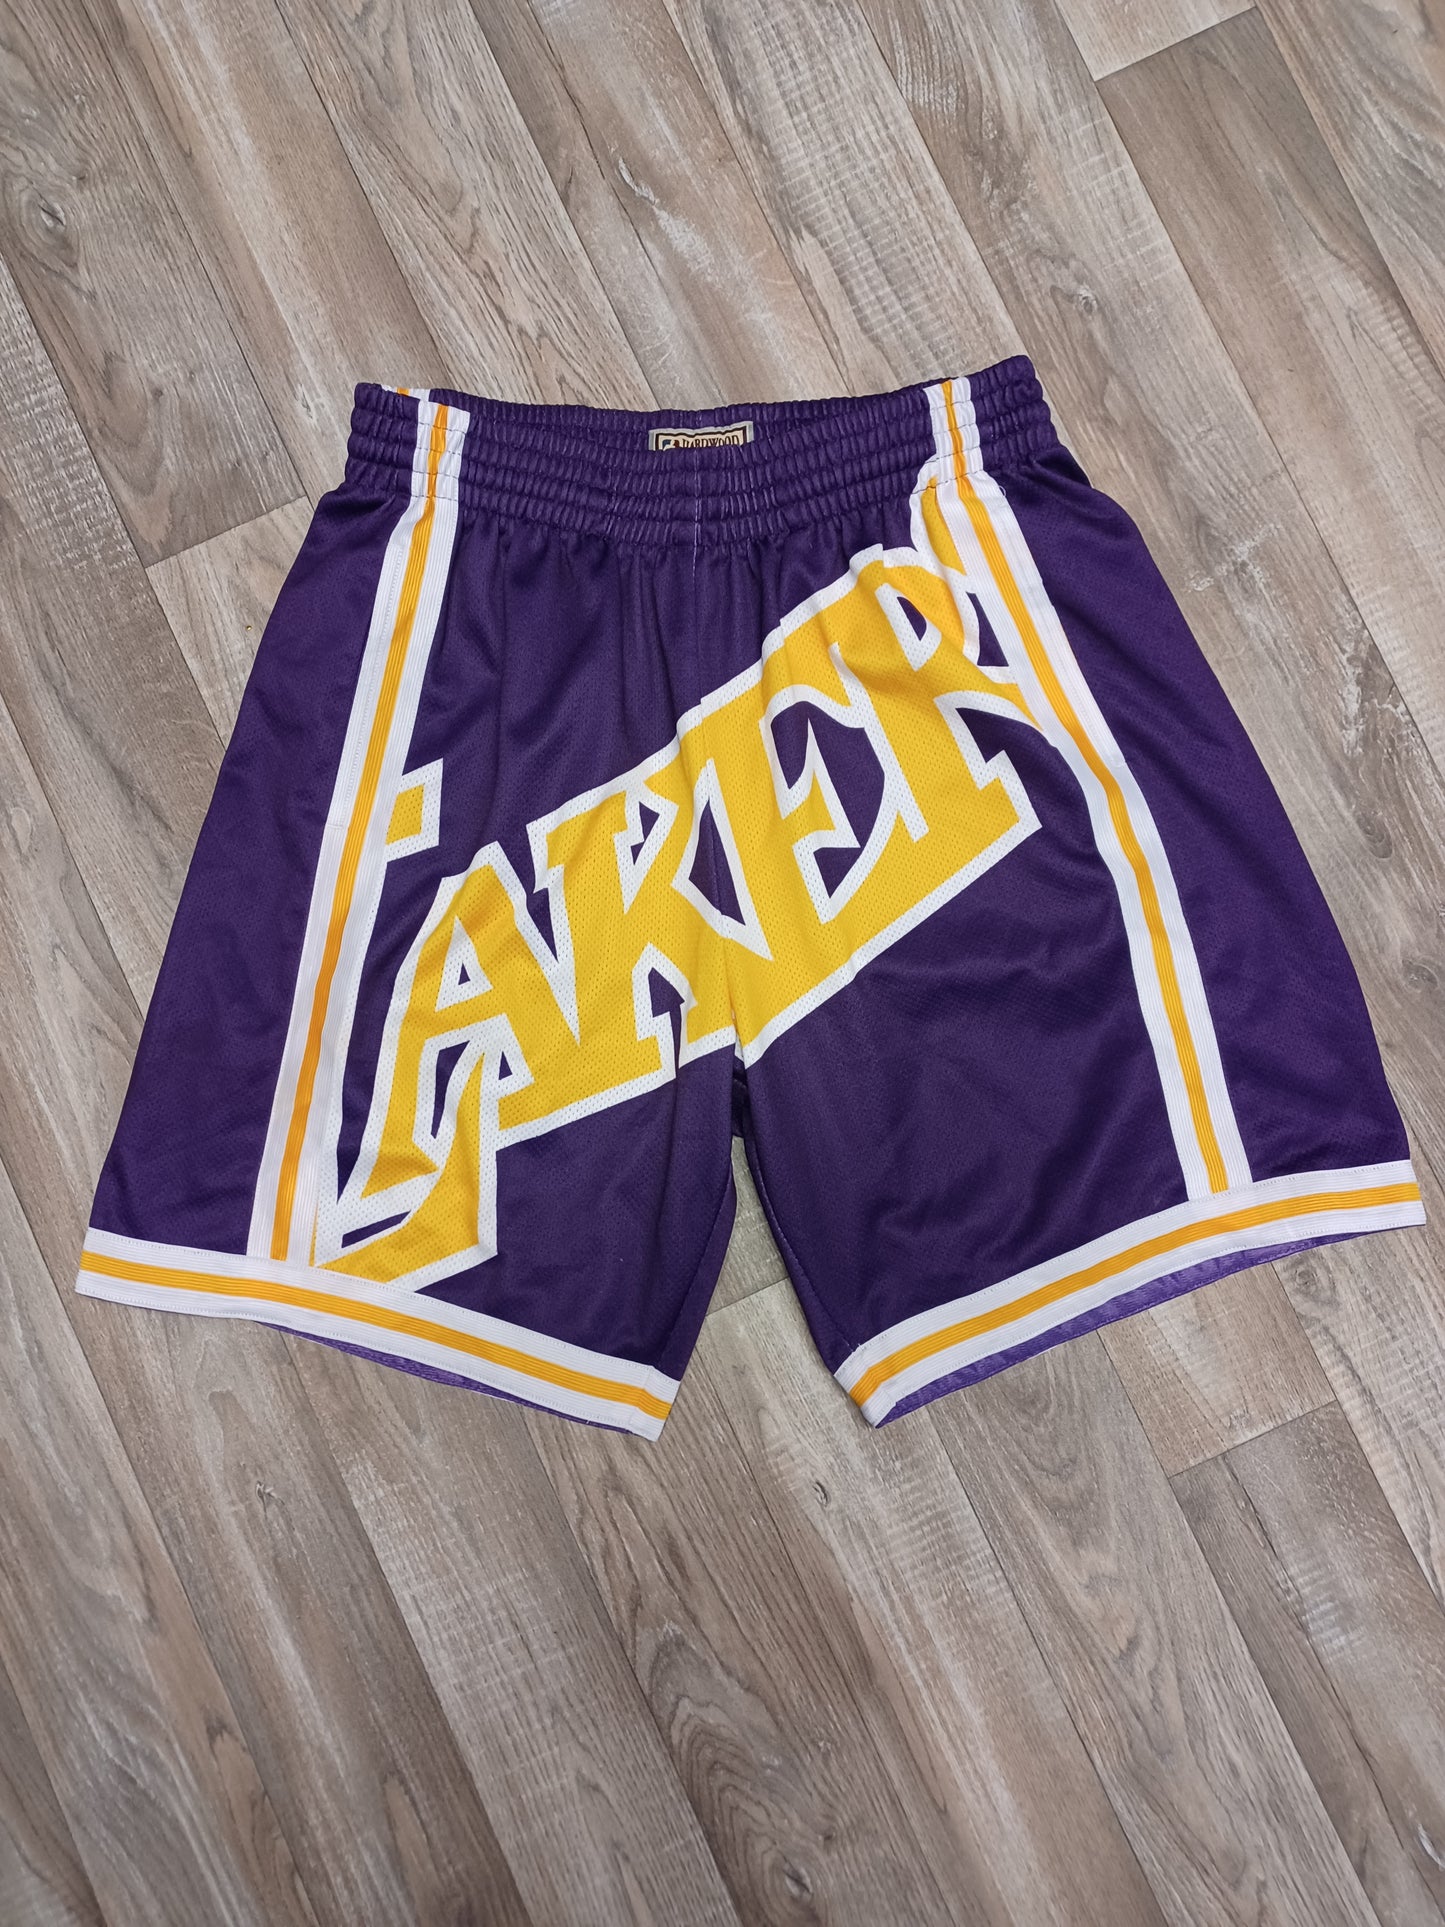 Los Angeles Lakers Shorts Size Large